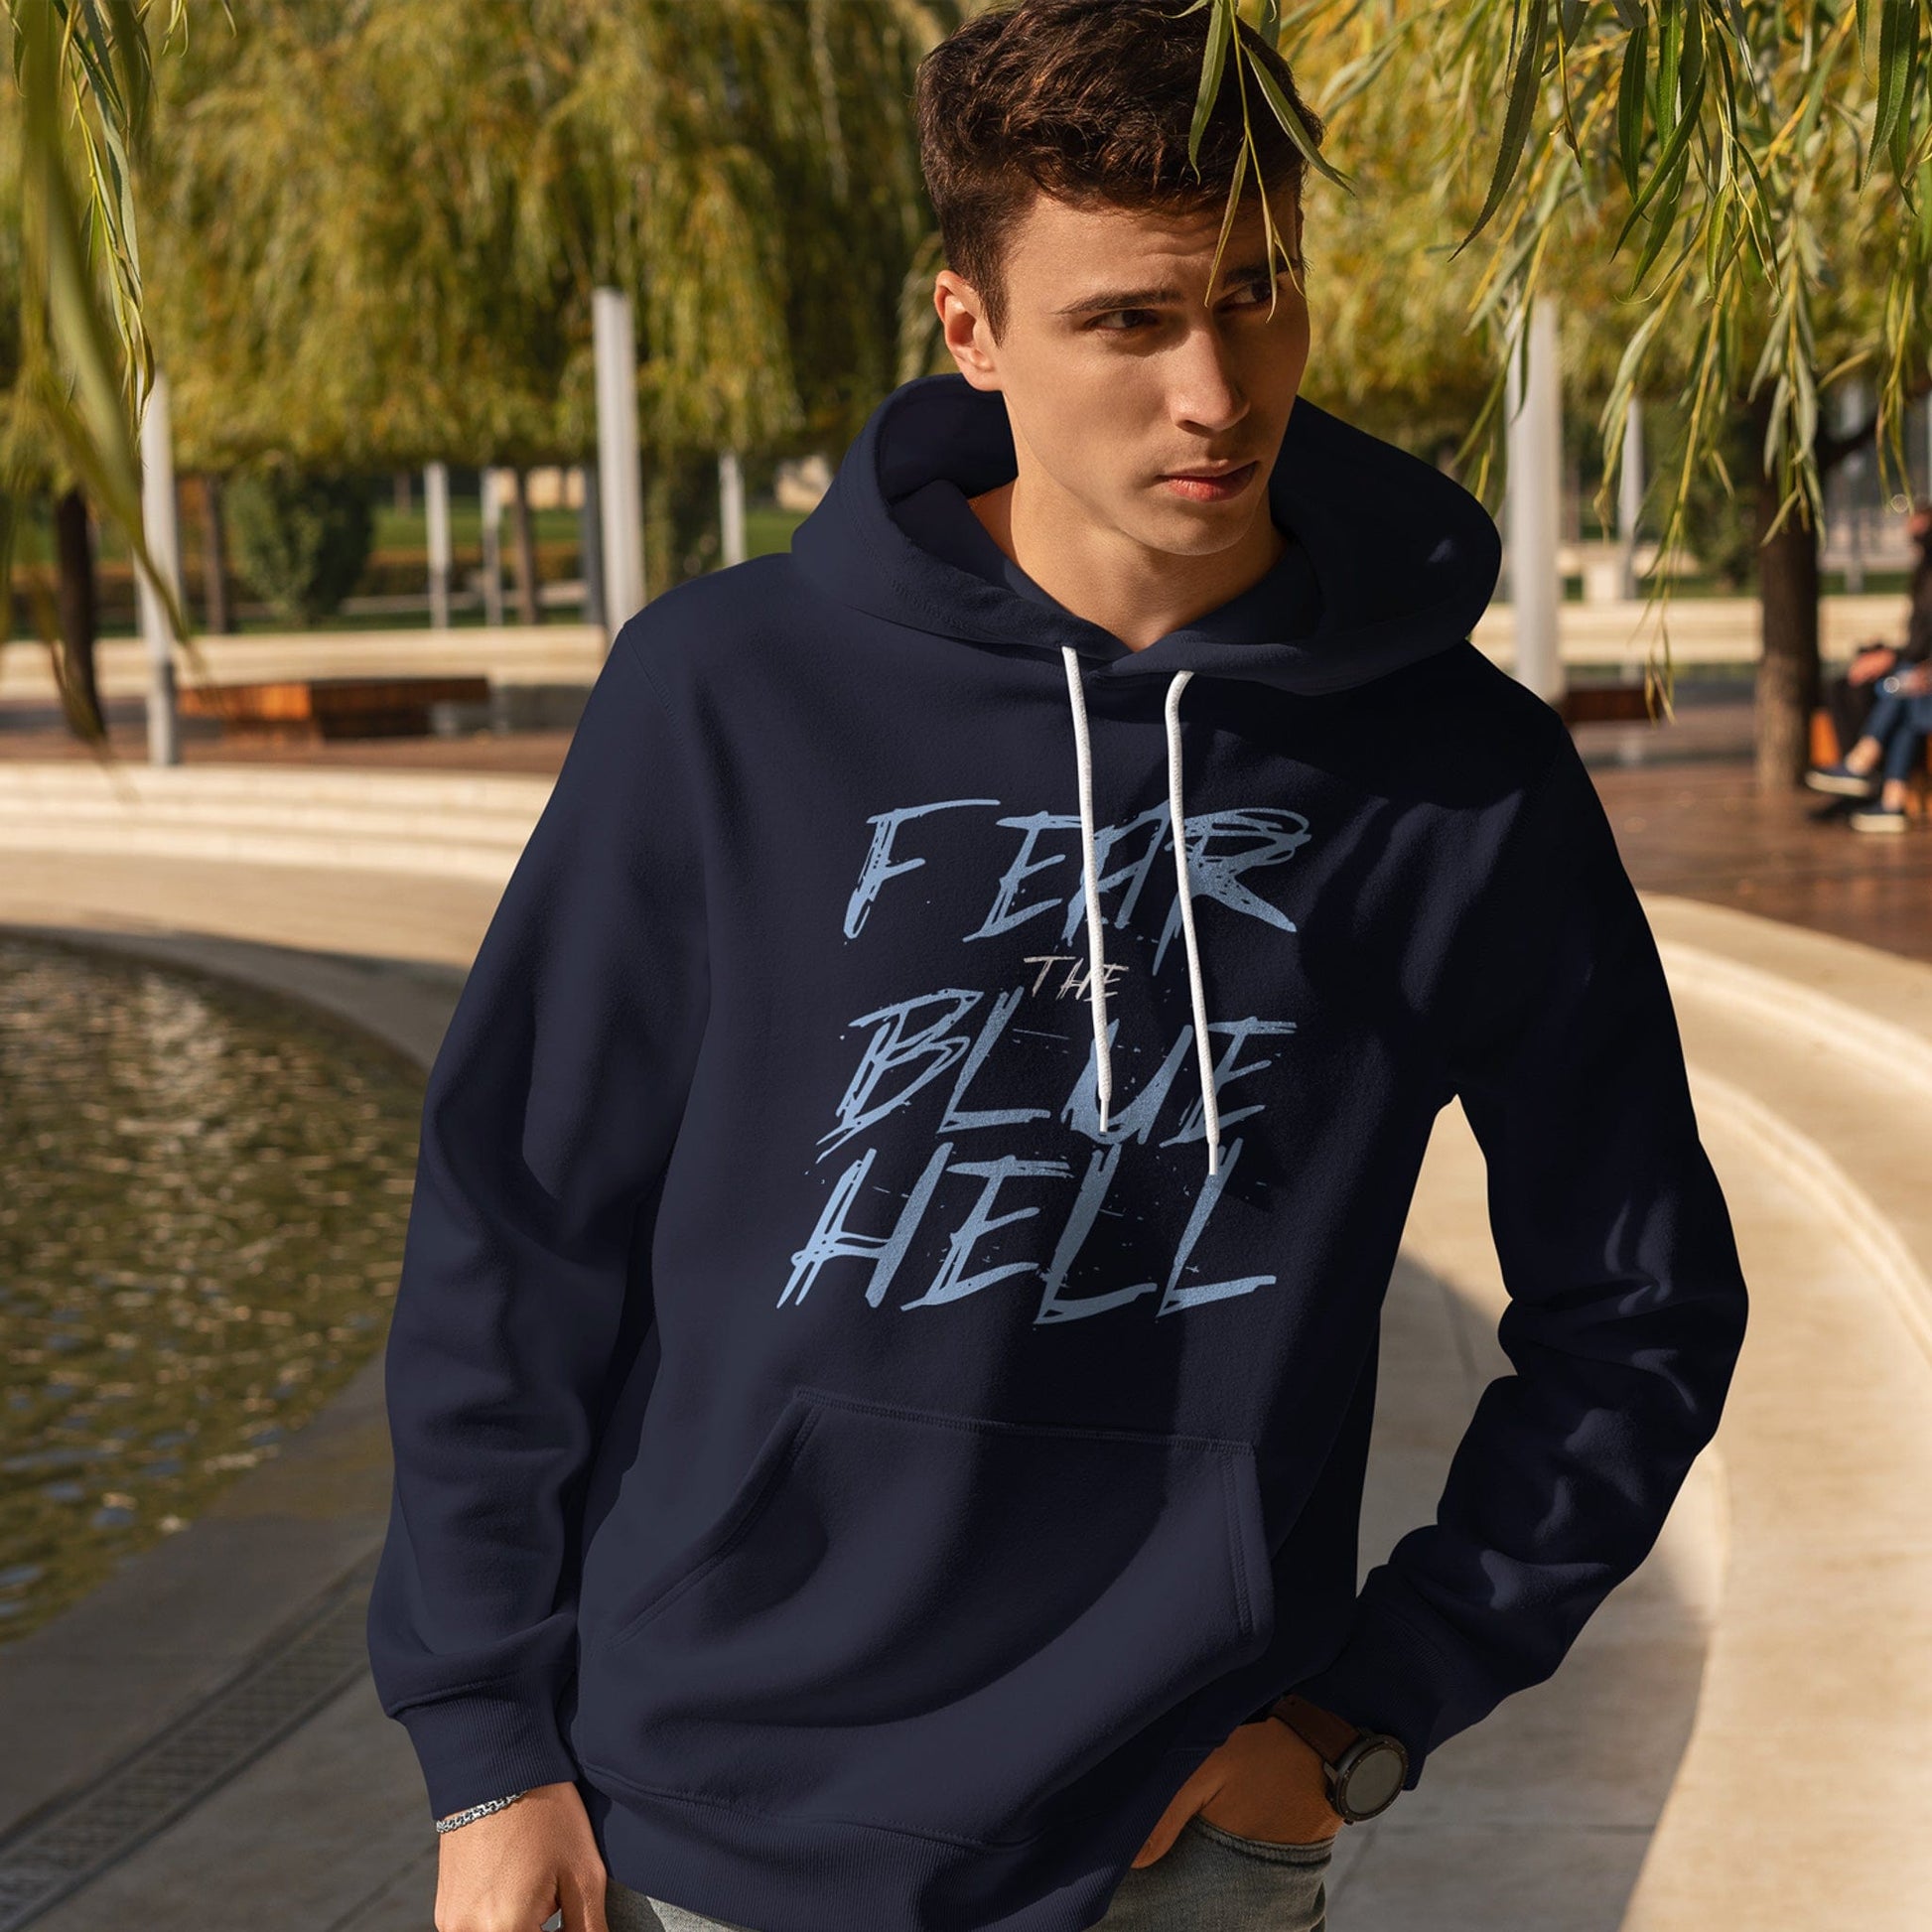 KC Swag Sporting Kansas City powder blue/white FEAR THE BLUE HELL on navy fleece pull-over hoodie worn by male model near water in a city park